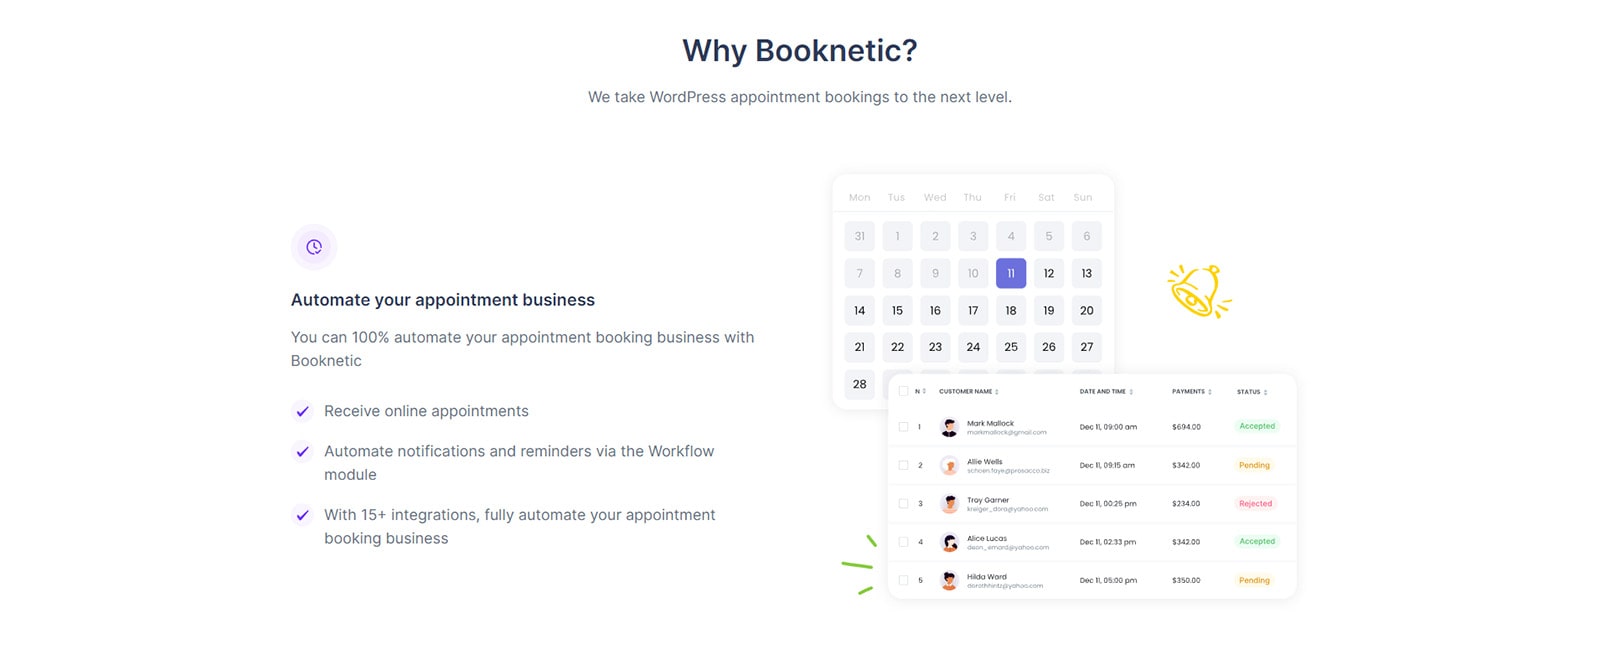 Figure of the appointment automation features that Booknetic provides.